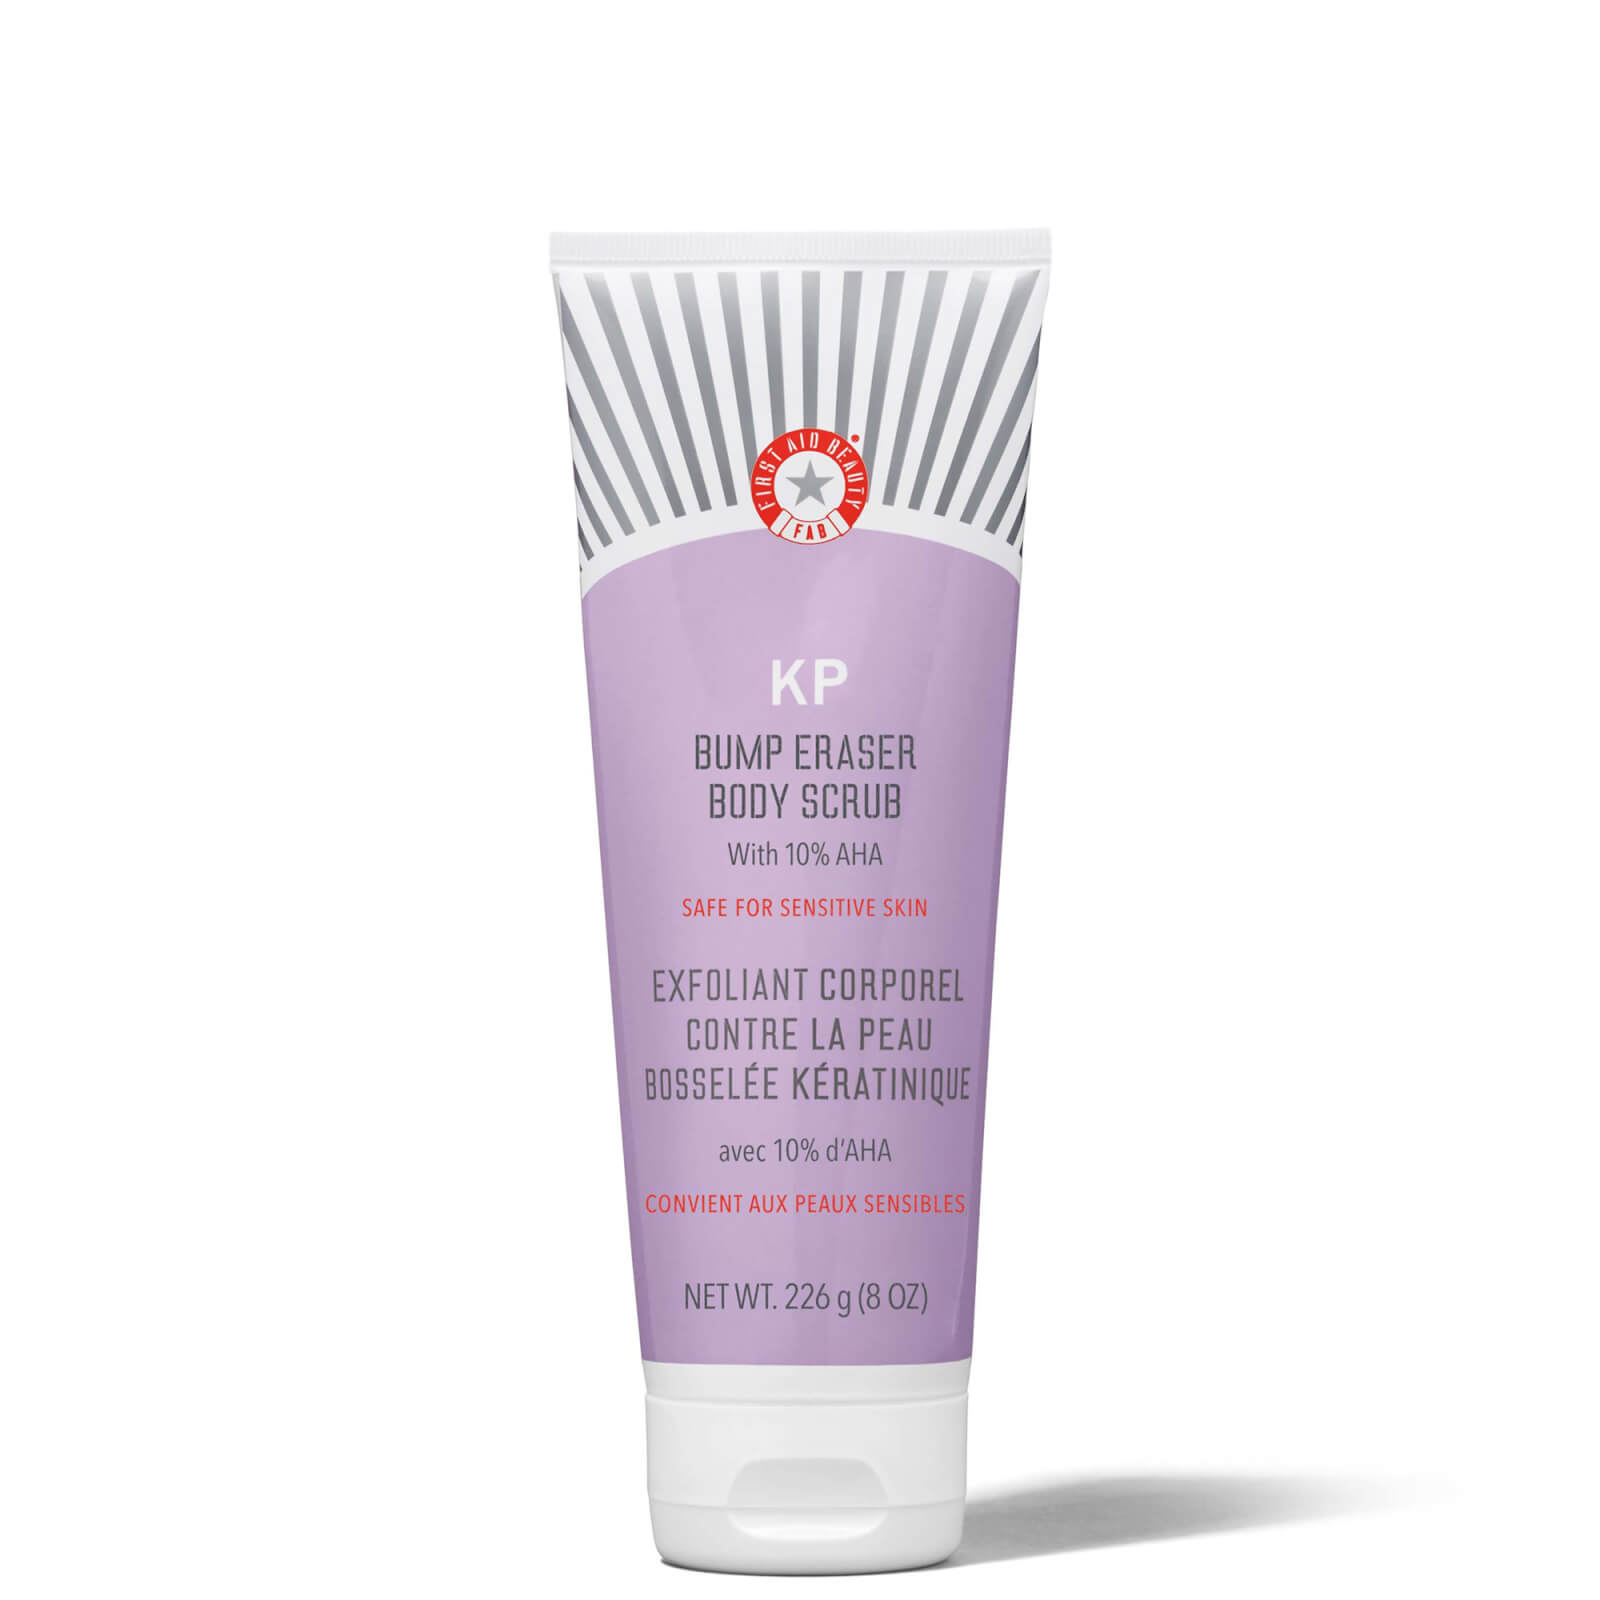 Image of First Aid Beauty KP Bump Eraser Body Scrub with 10% AHA 226g